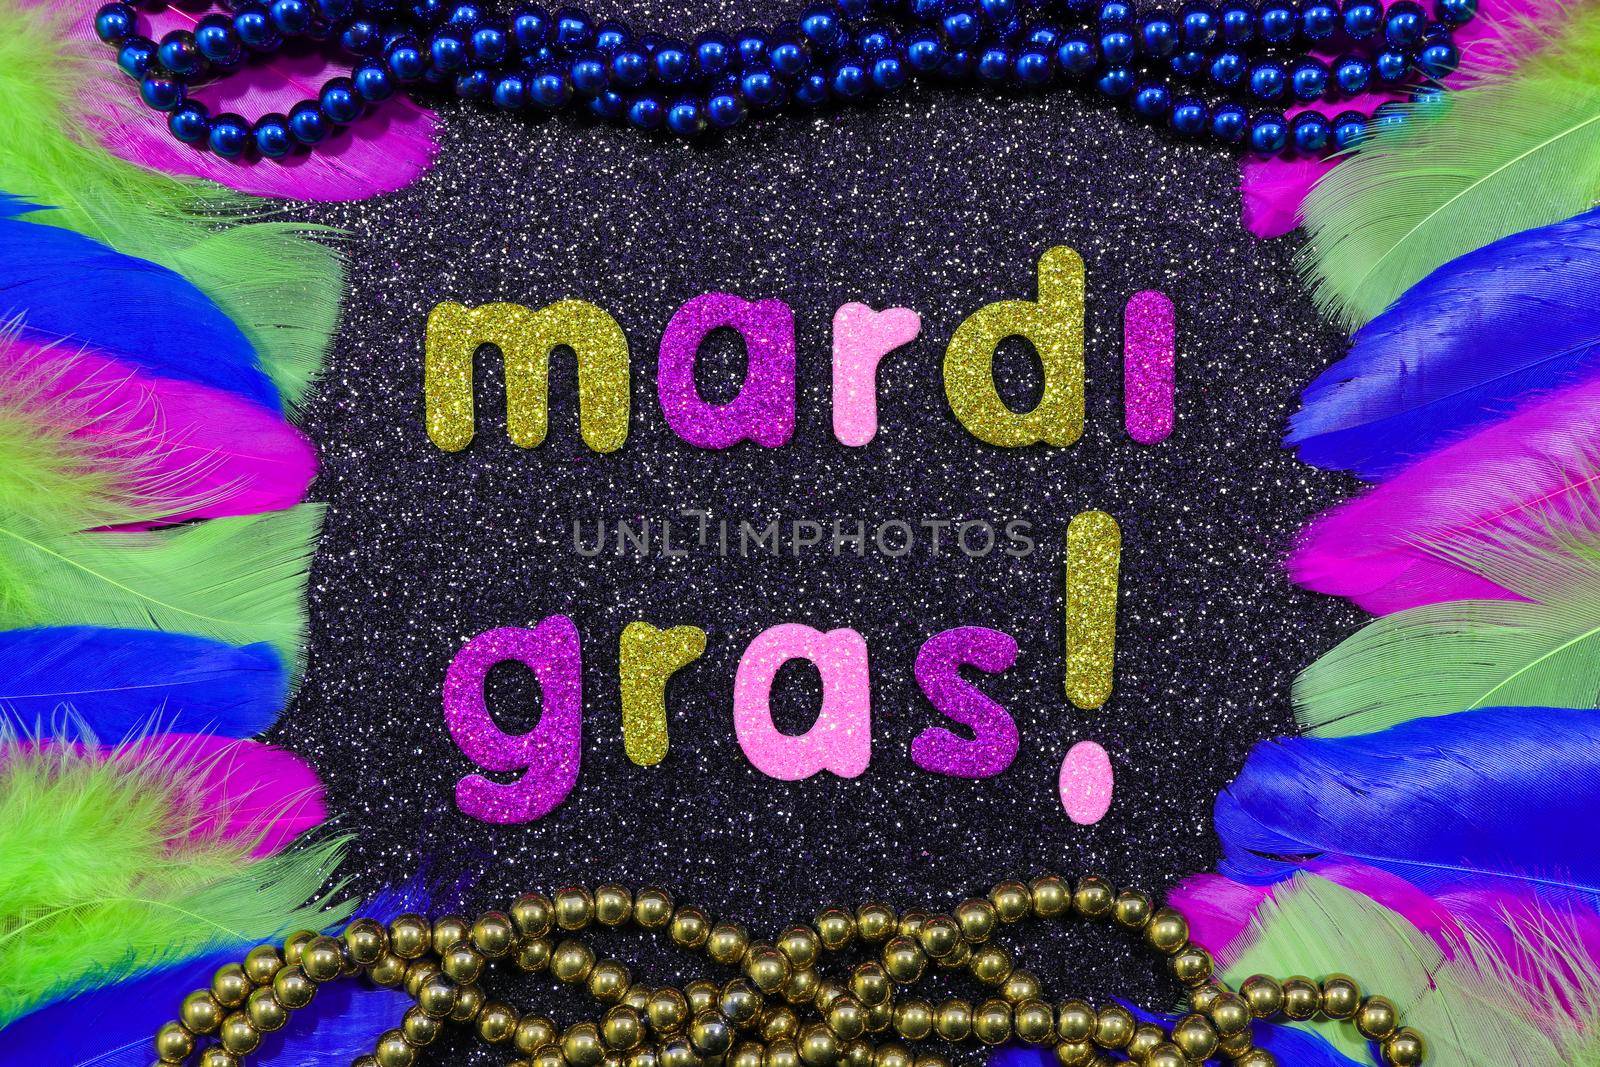 Mardi Gras text carnival theme with feathers and bead strings on textured black surface